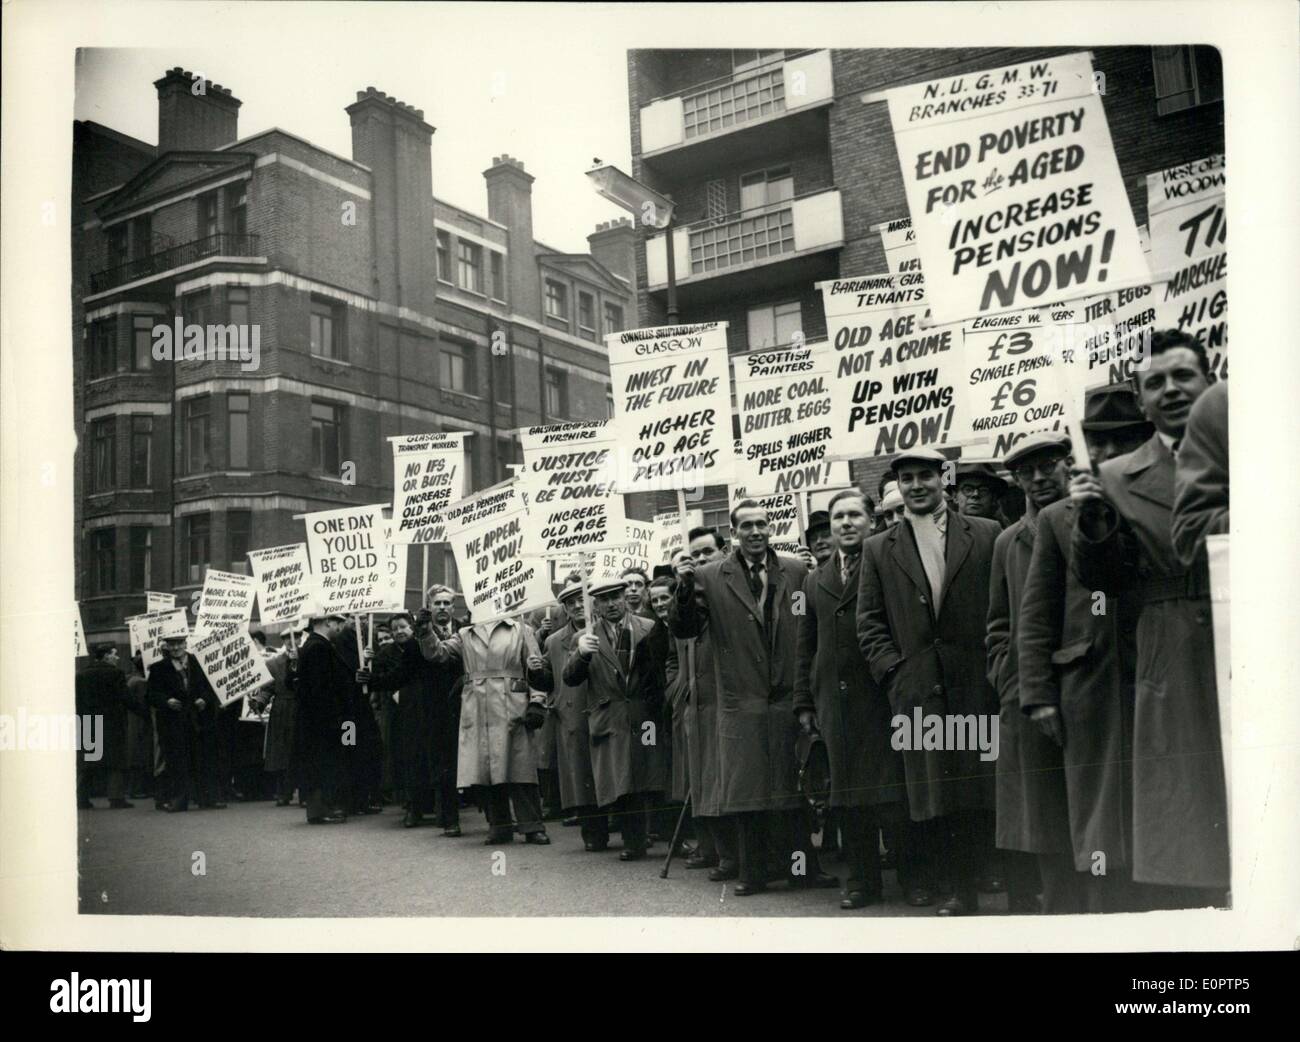 Feb 26 1957 Old Age Pensioners In Protest March In London They Demand Higher Pensions Old